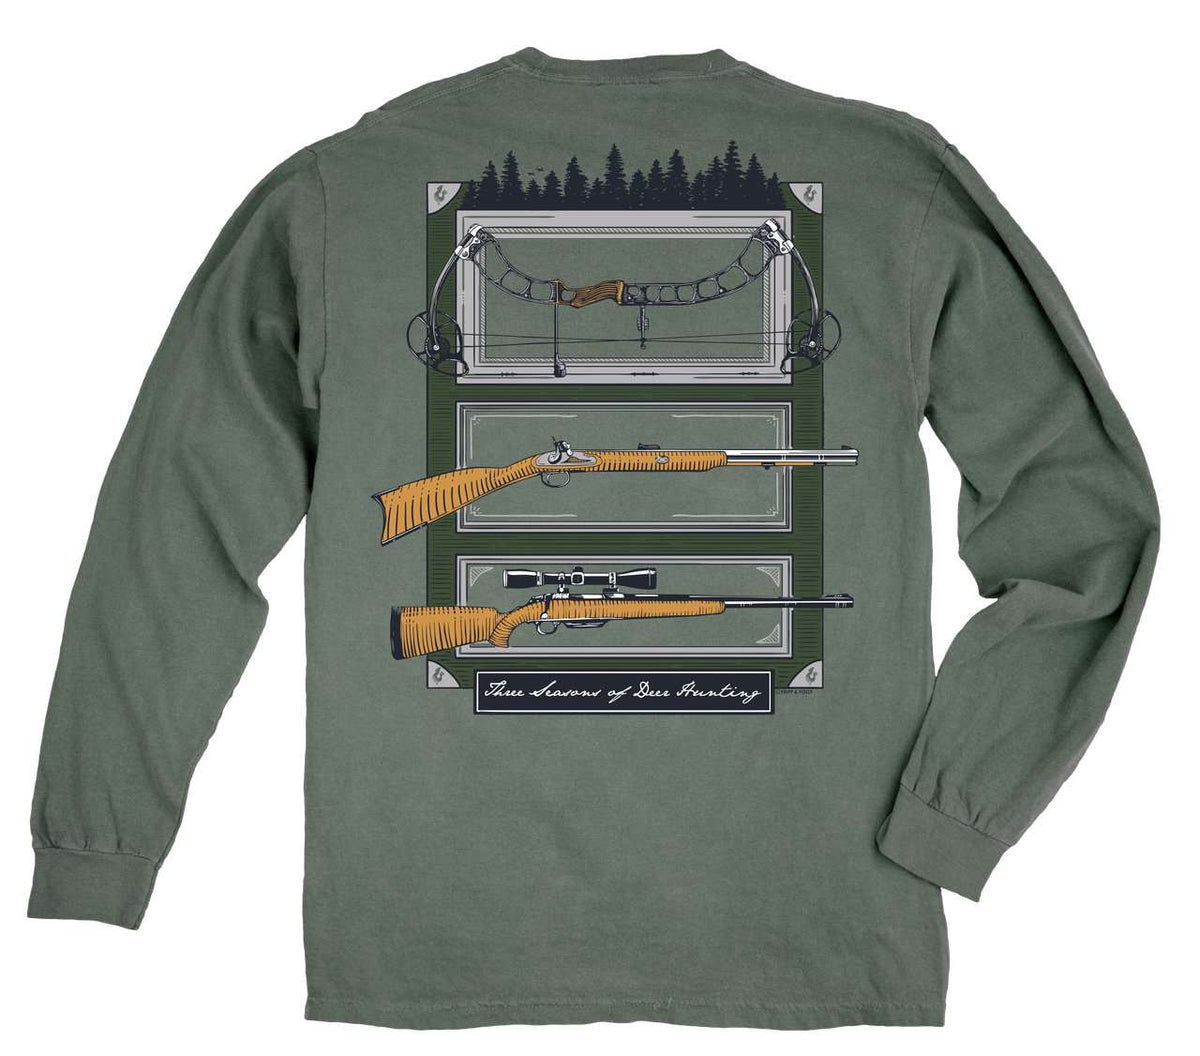 Seasons of Hunting Long Sleeve Tee in Light Green by Fripp & Folly - Country Club Prep